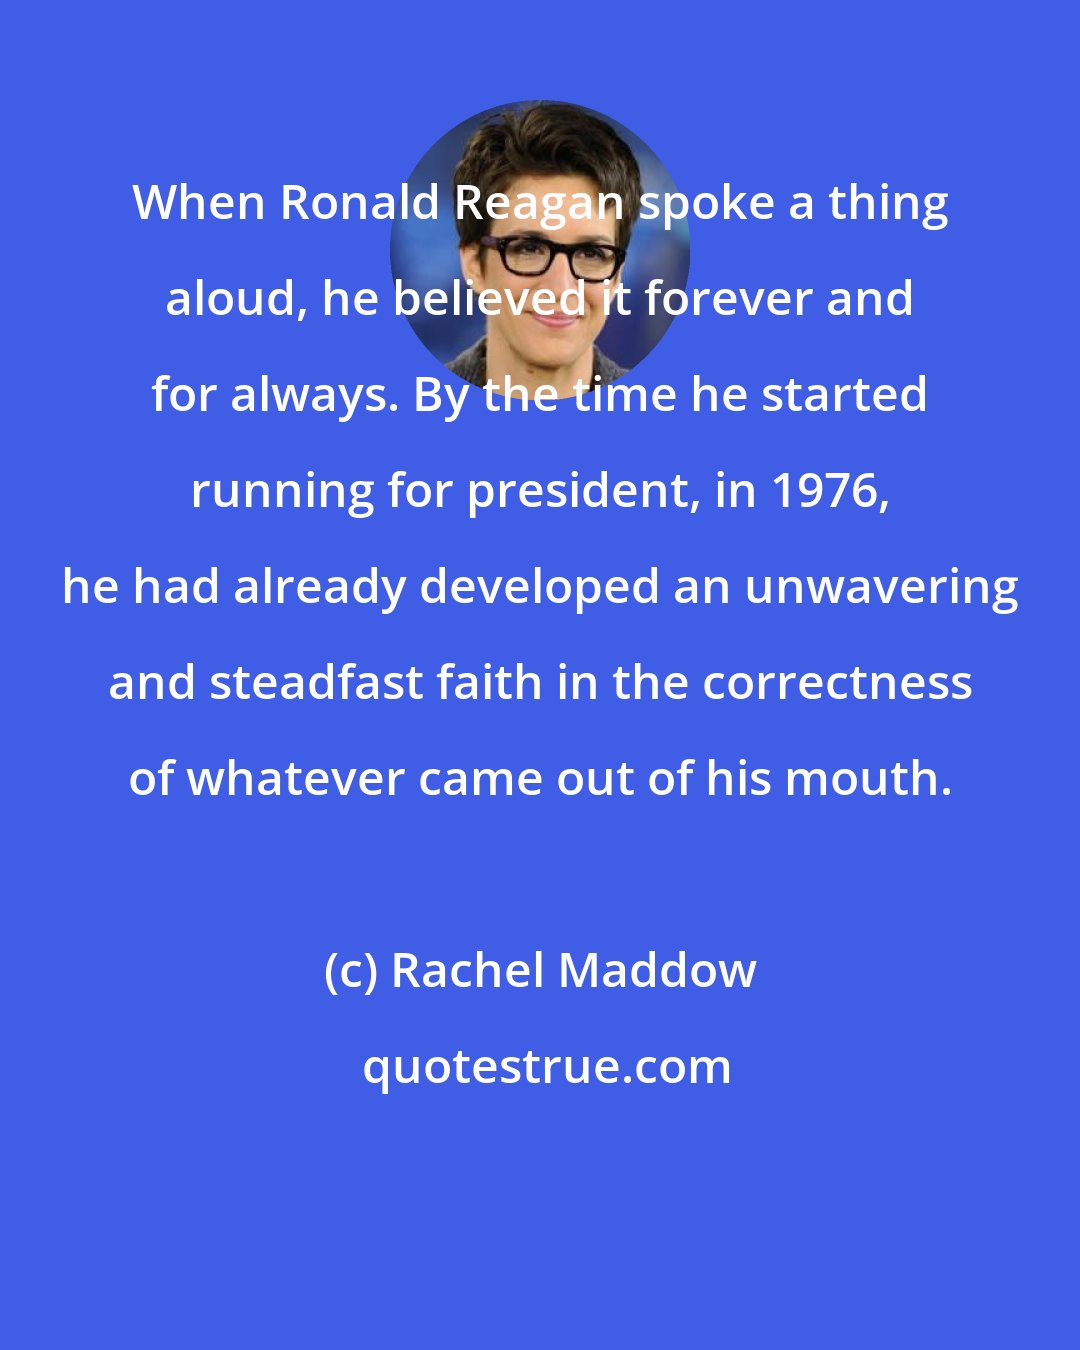 Rachel Maddow: When Ronald Reagan spoke a thing aloud, he believed it forever and for always. By the time he started running for president, in 1976, he had already developed an unwavering and steadfast faith in the correctness of whatever came out of his mouth.